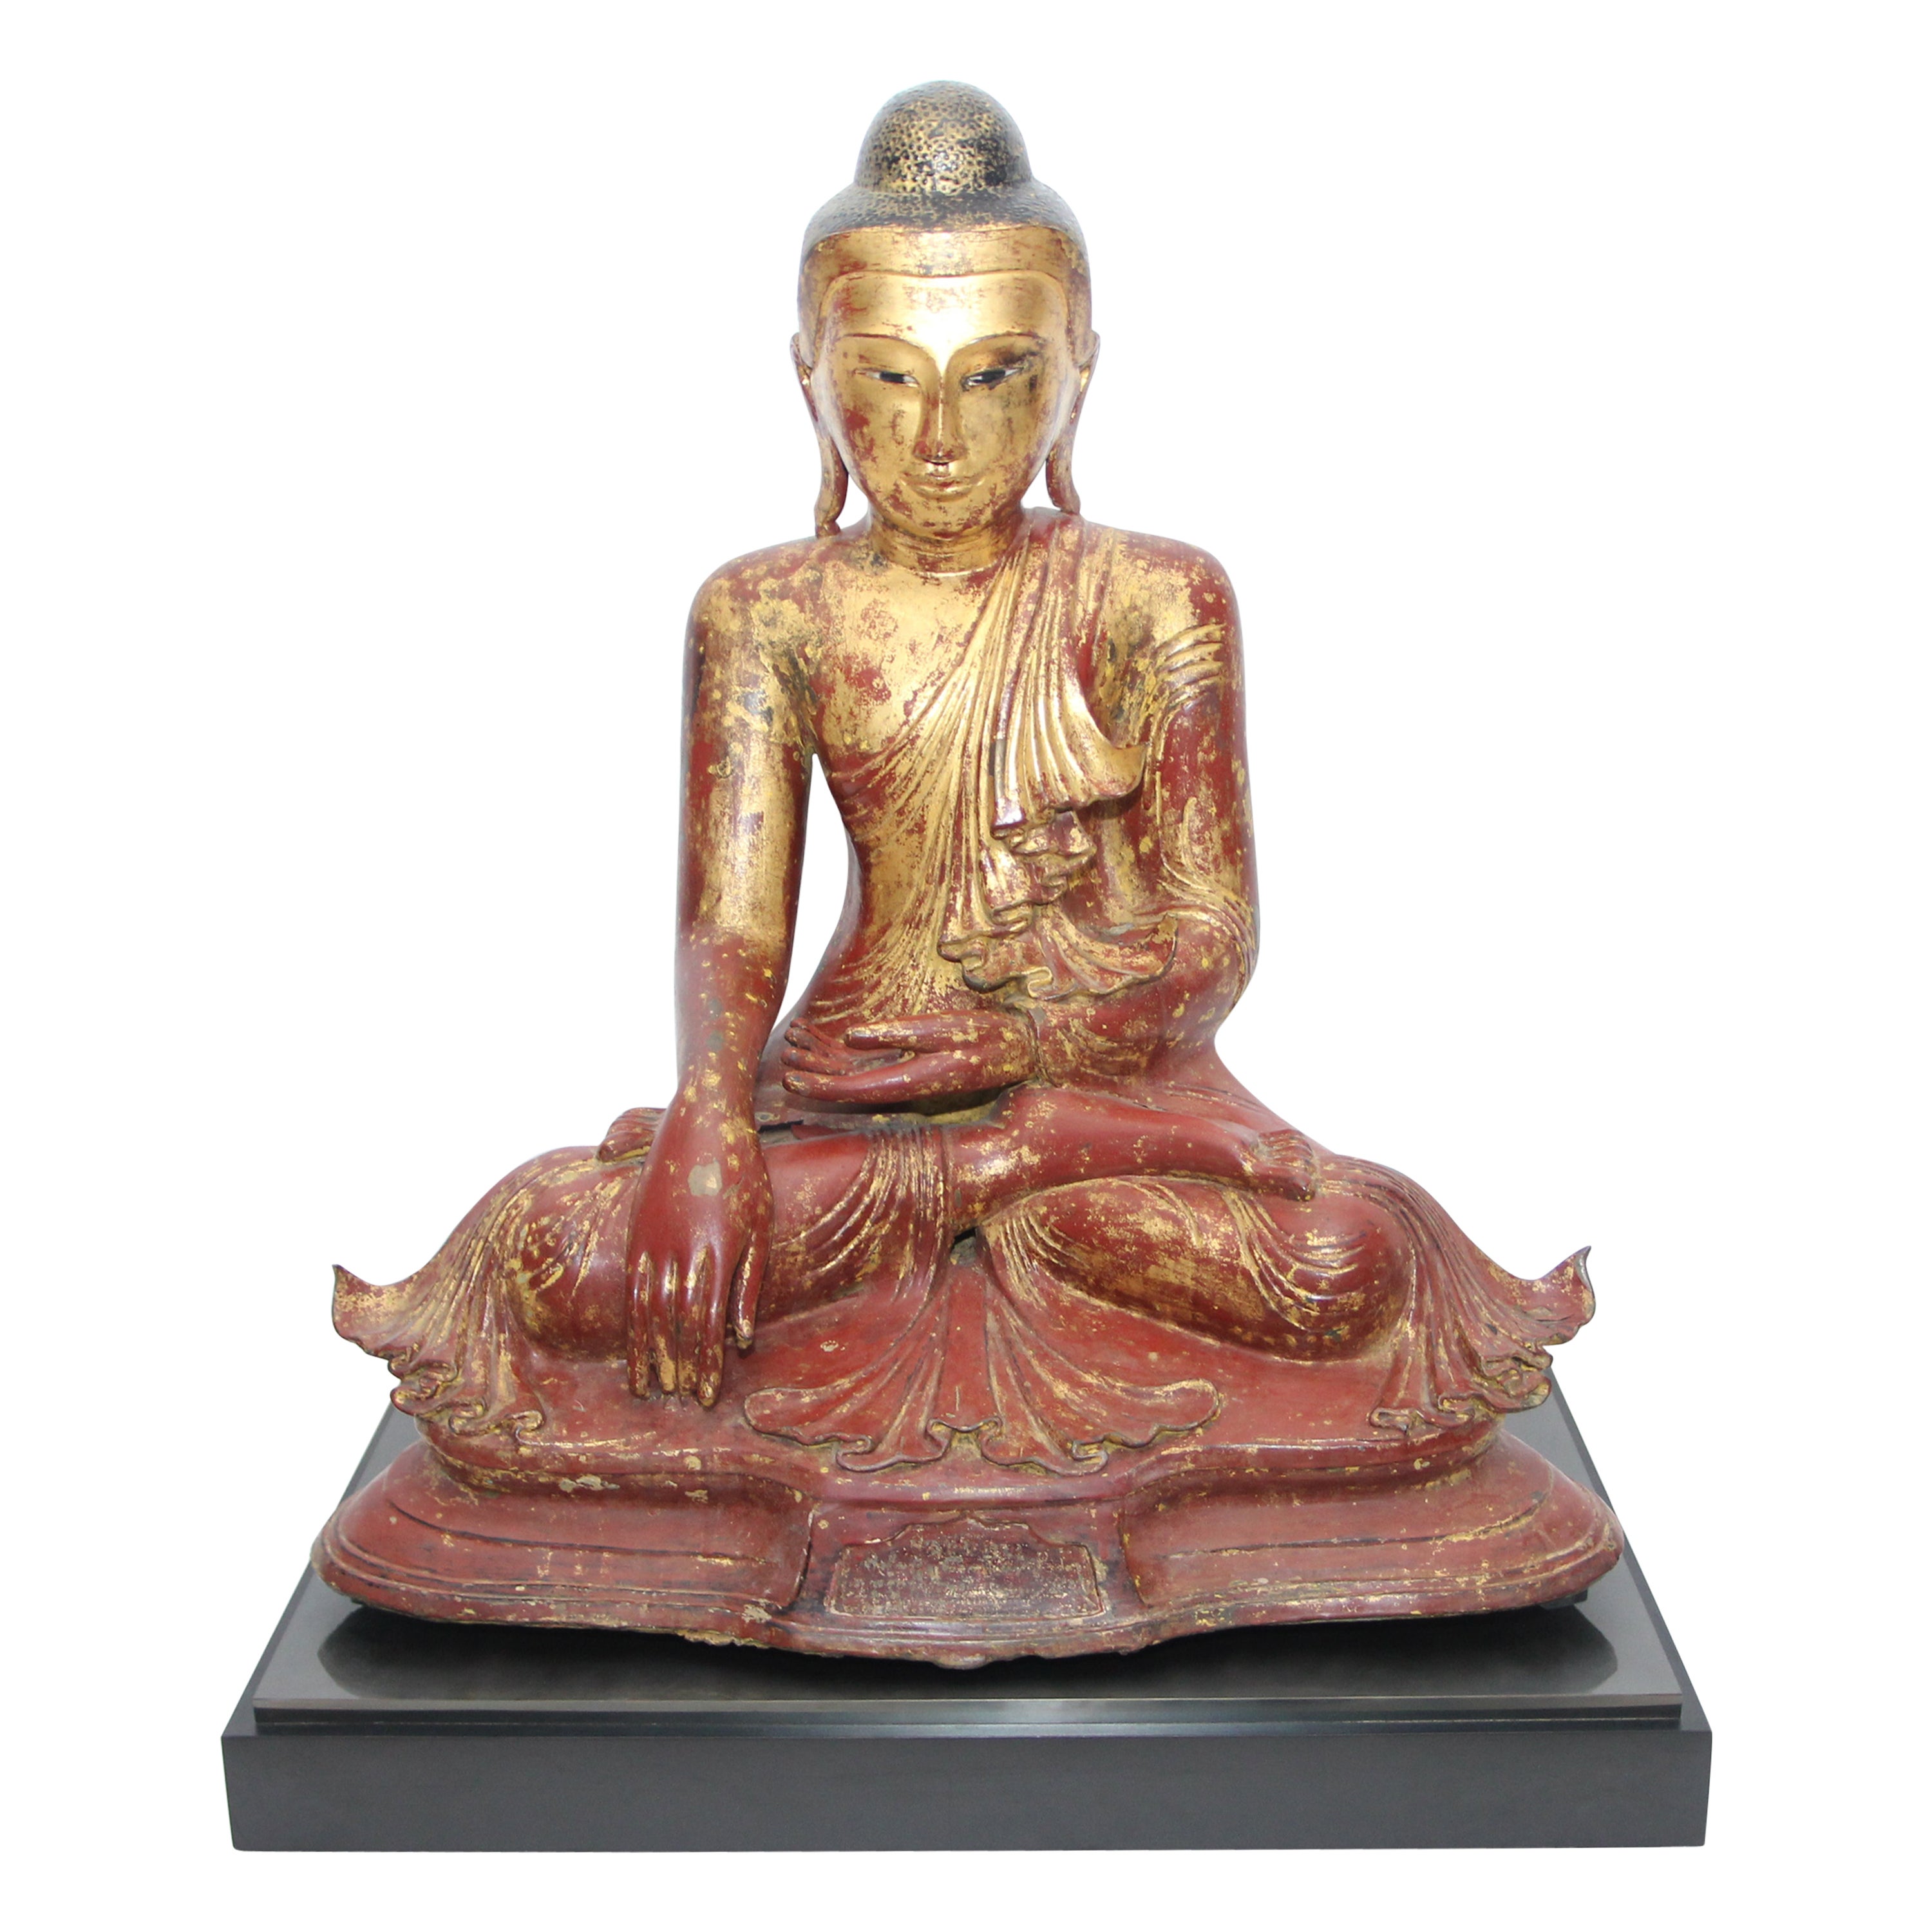 Antique Burmese Bronze Seated Mandalay Buddha with gilt and lacquer finish